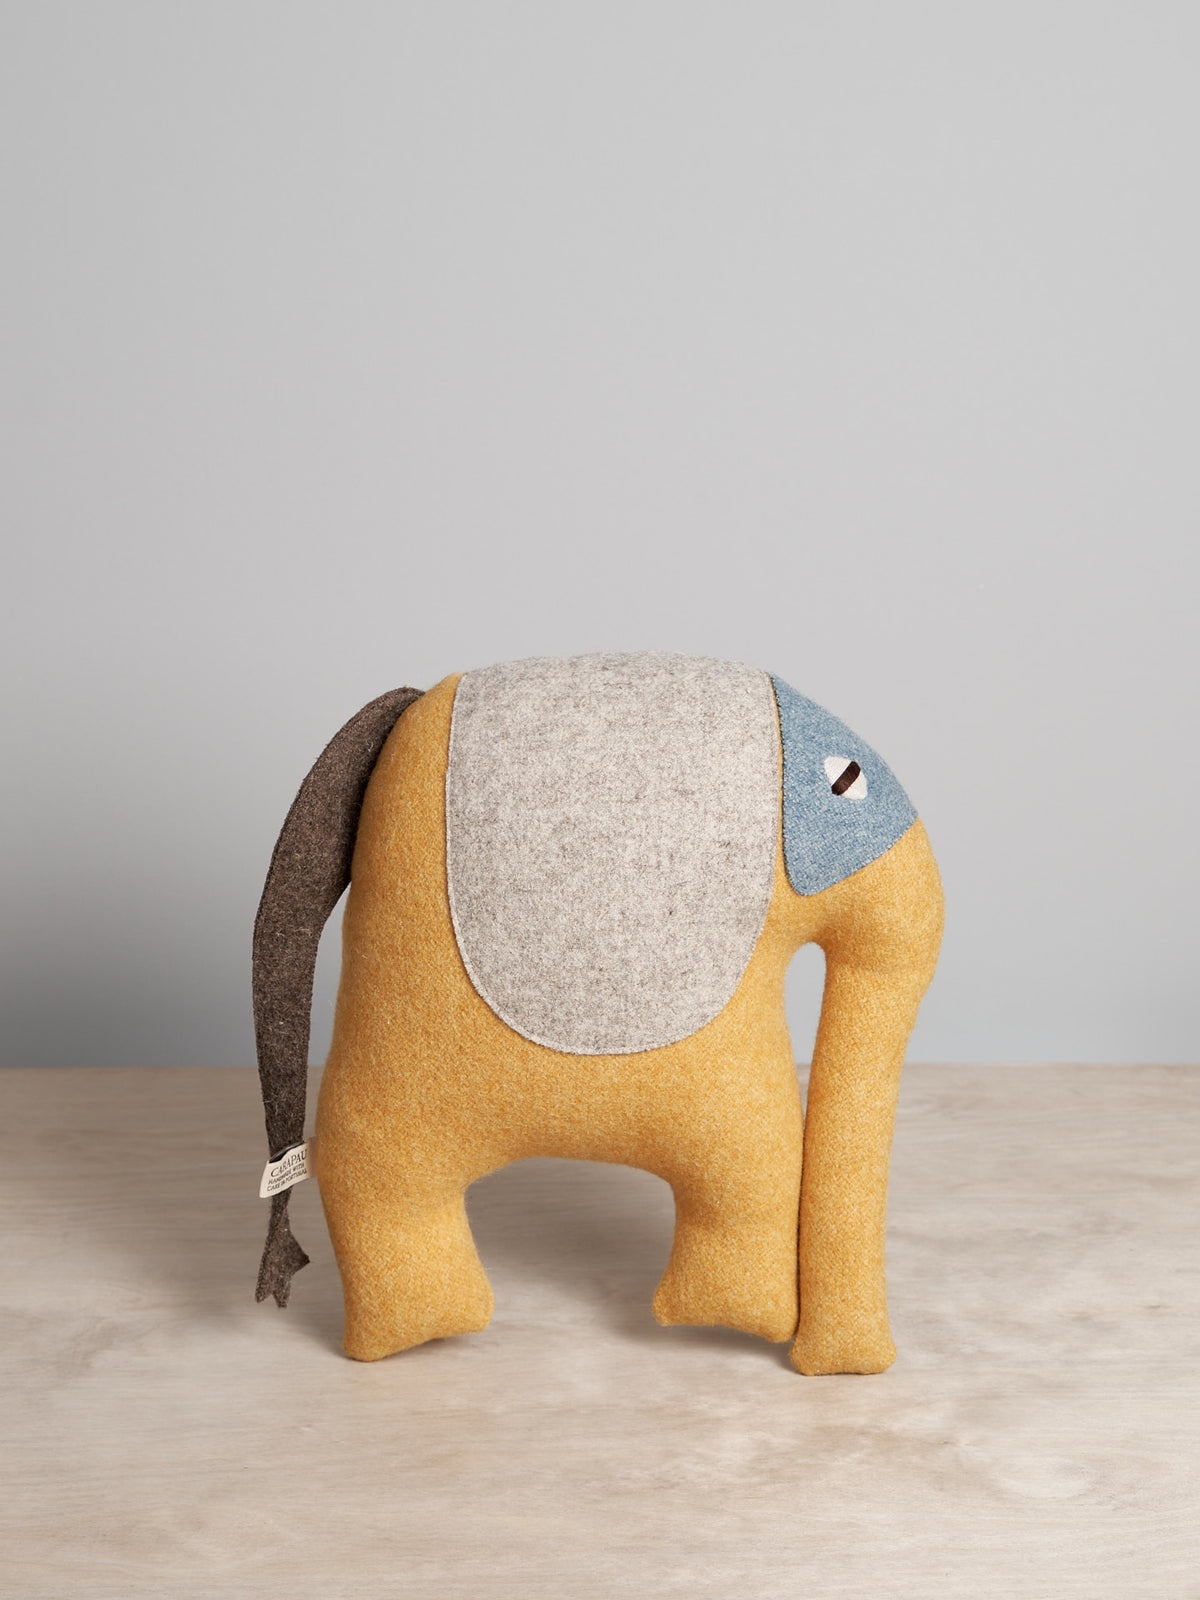 A DEEP, the Indian Elephant stuffed animal on a wooden table